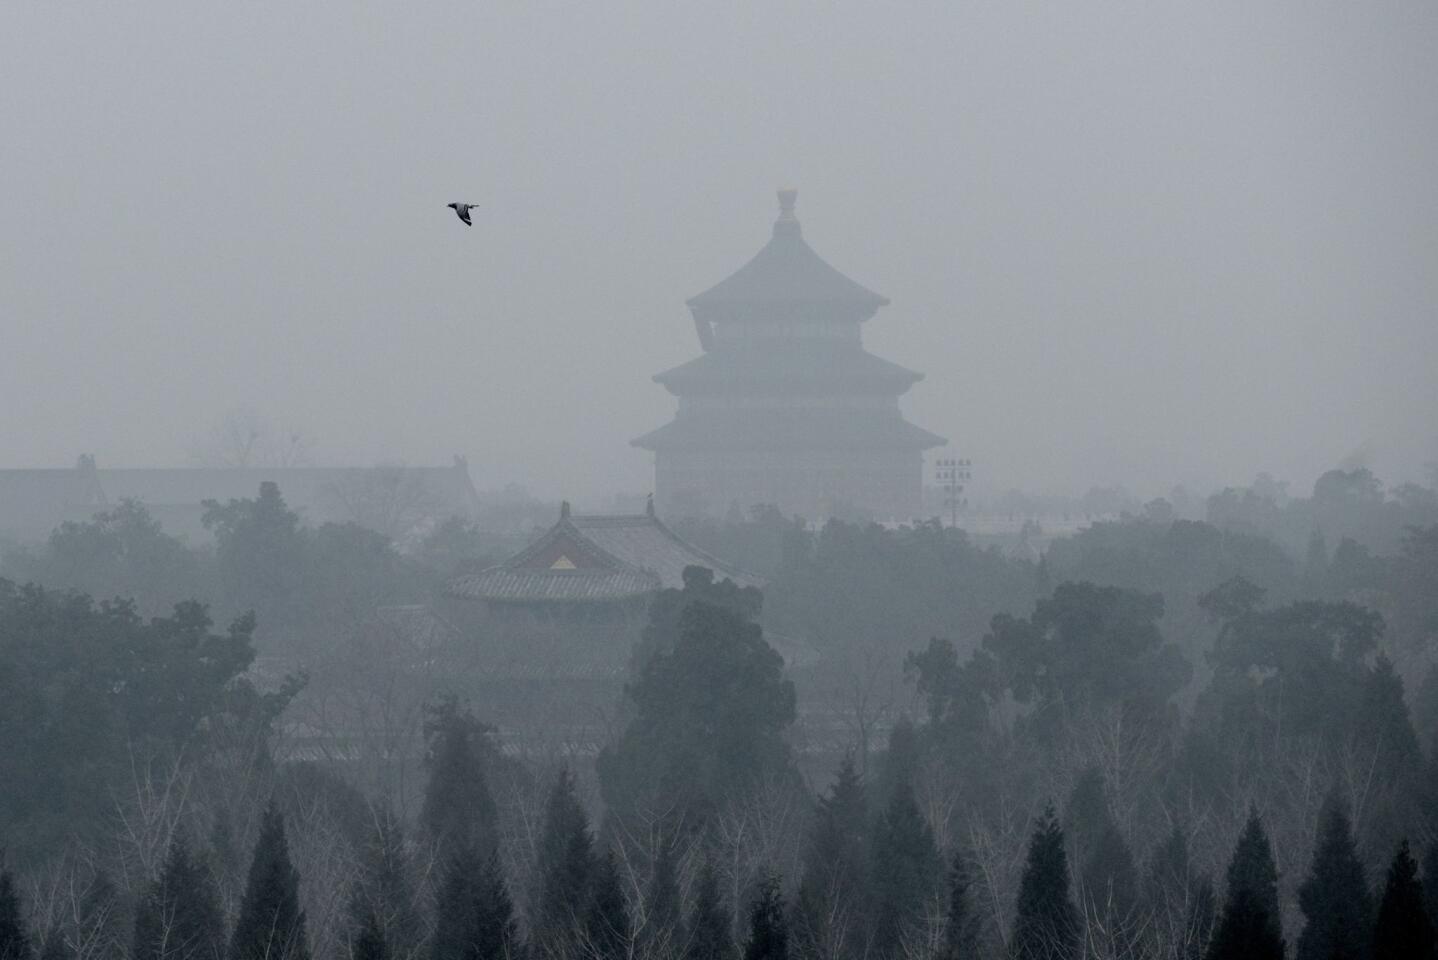 A bird flies through heavy pollution above over the grounds of the Temple of Heaven in Beijing on Dec. 8, 2015. Half of Beijing's private cars were ordered off the streets and many construction sites and schools were closed under the Chinese capital's first-ever red alert for pollution.